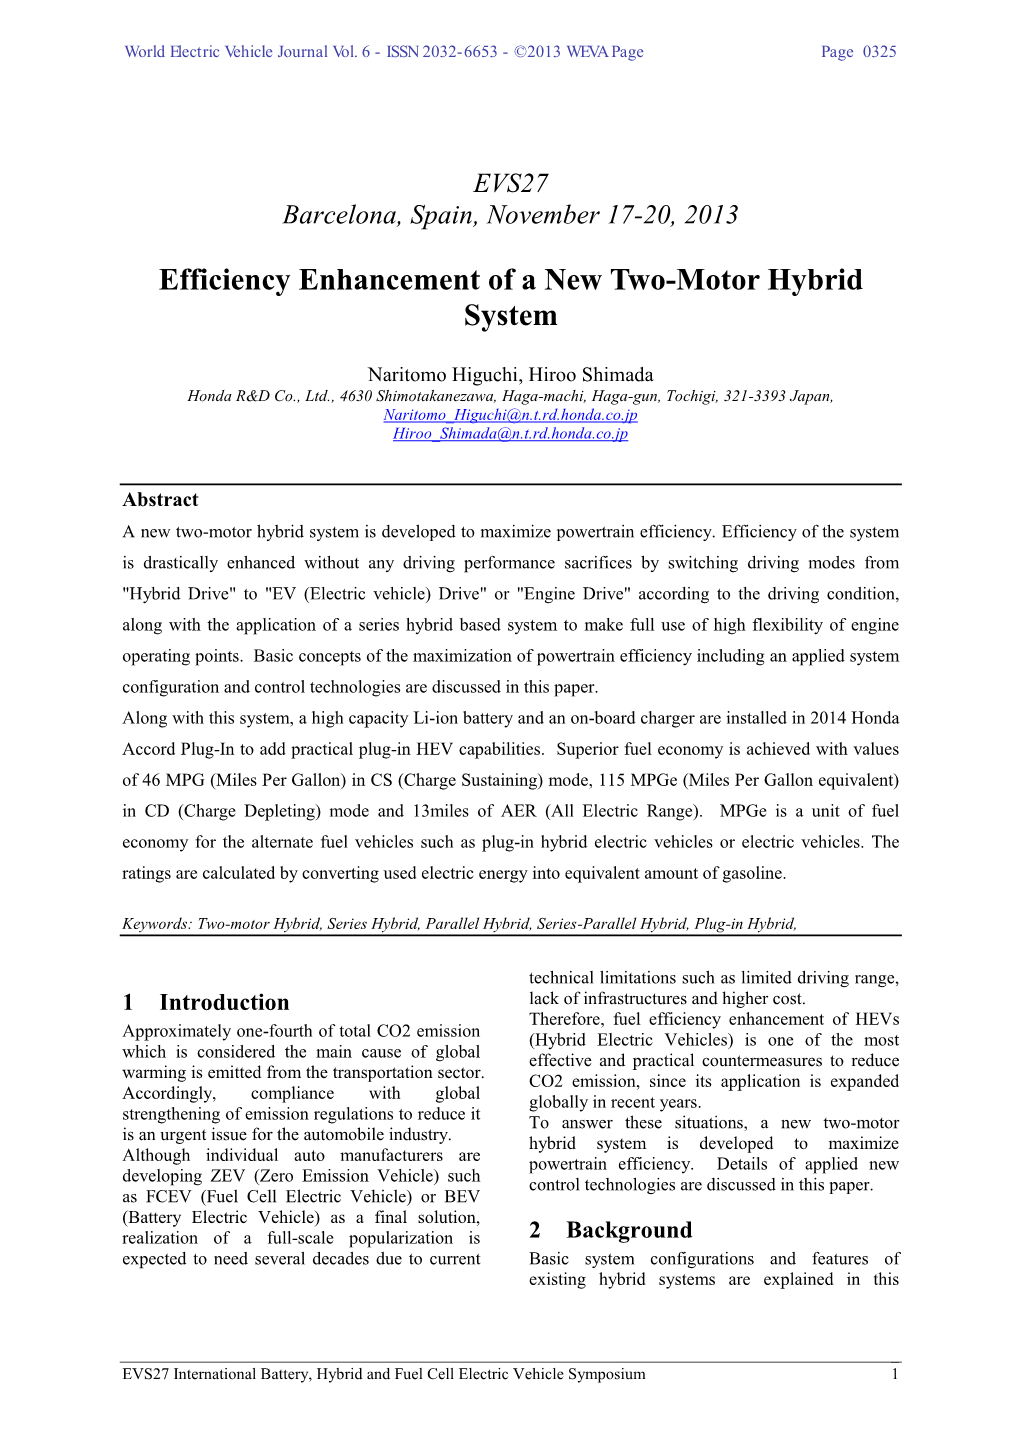 Efficiency Enhancement of a New Two-Motor Hybrid System